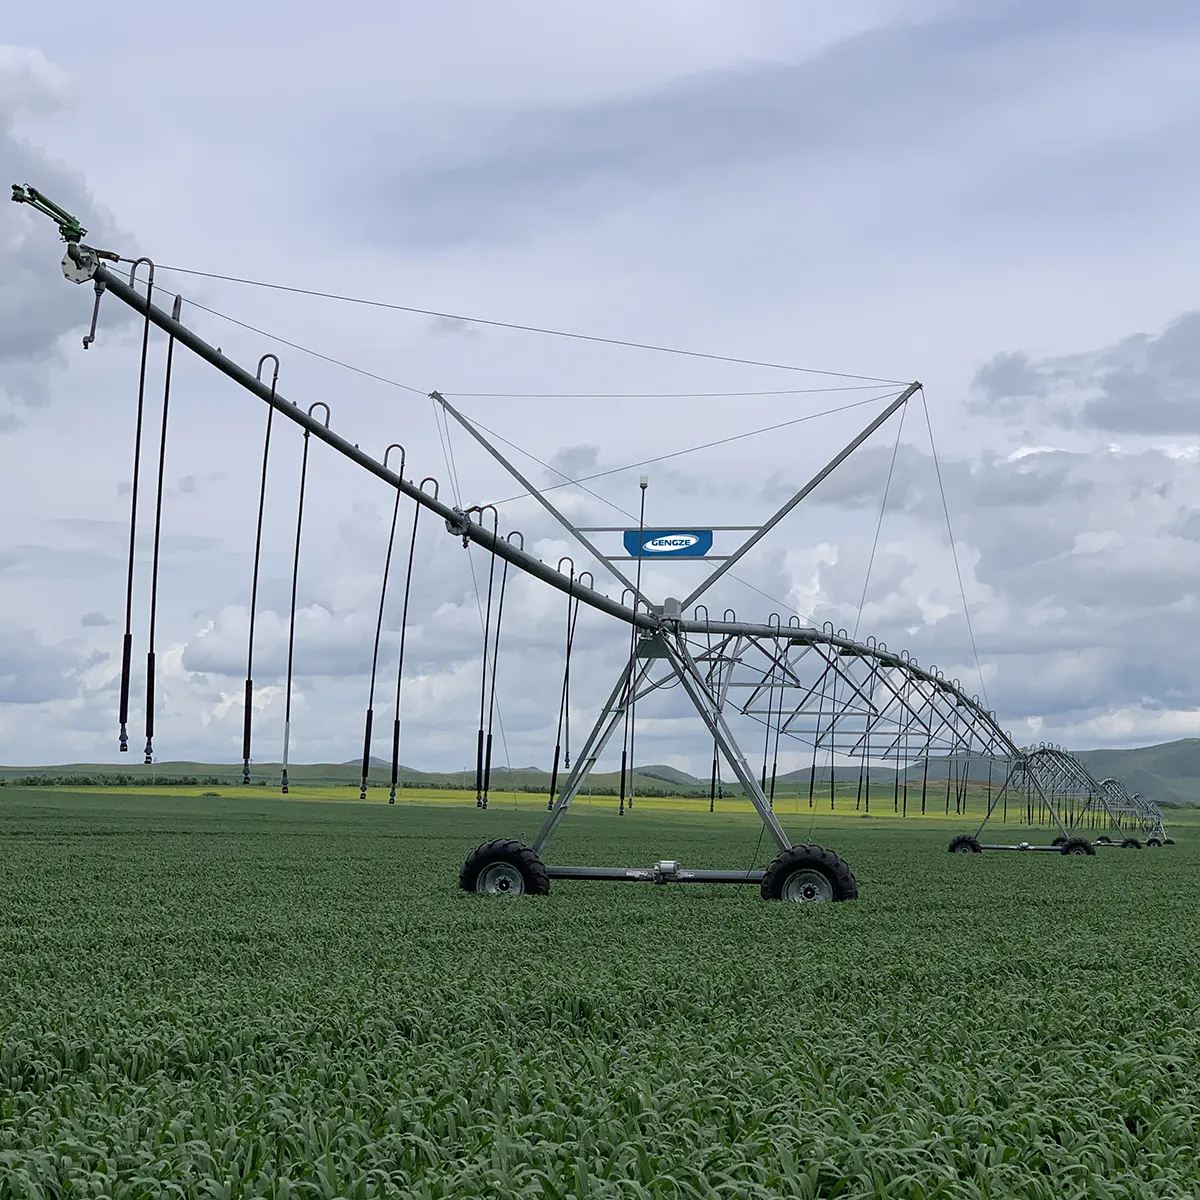 1-100 Hectare Agricultural Central Pivot Irrigation System Solar or Movable Lateral Axial Spraying Irrigator